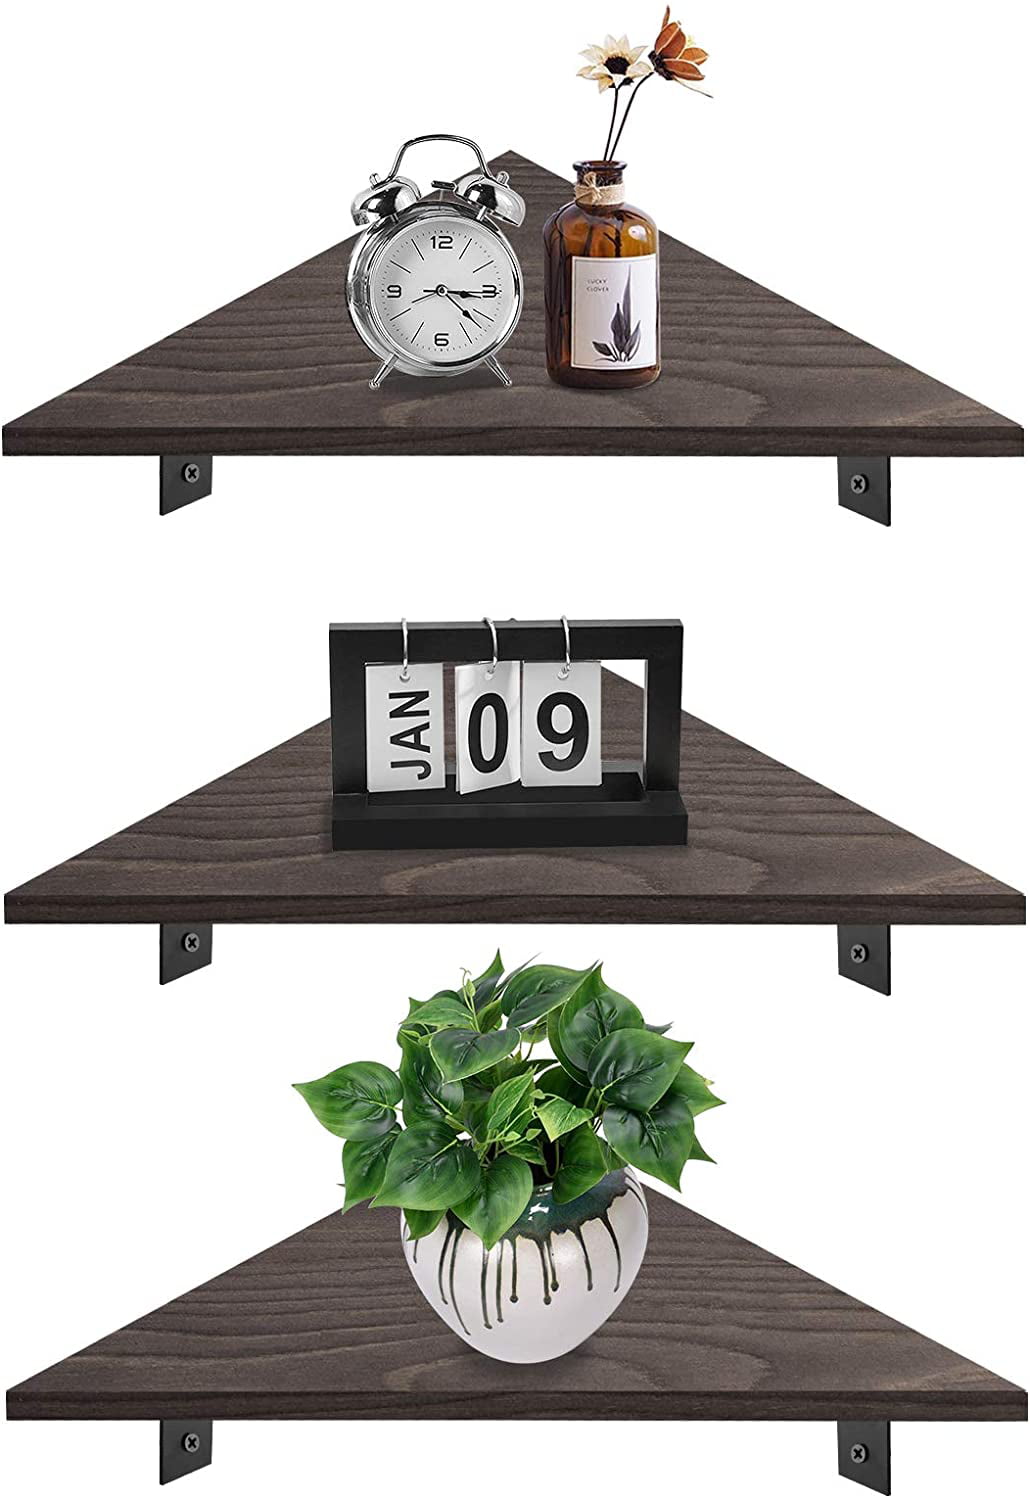 Set of 3 Decorative Rustic Solid Wood Wall Storage Shelf for Bedroom Living Room 